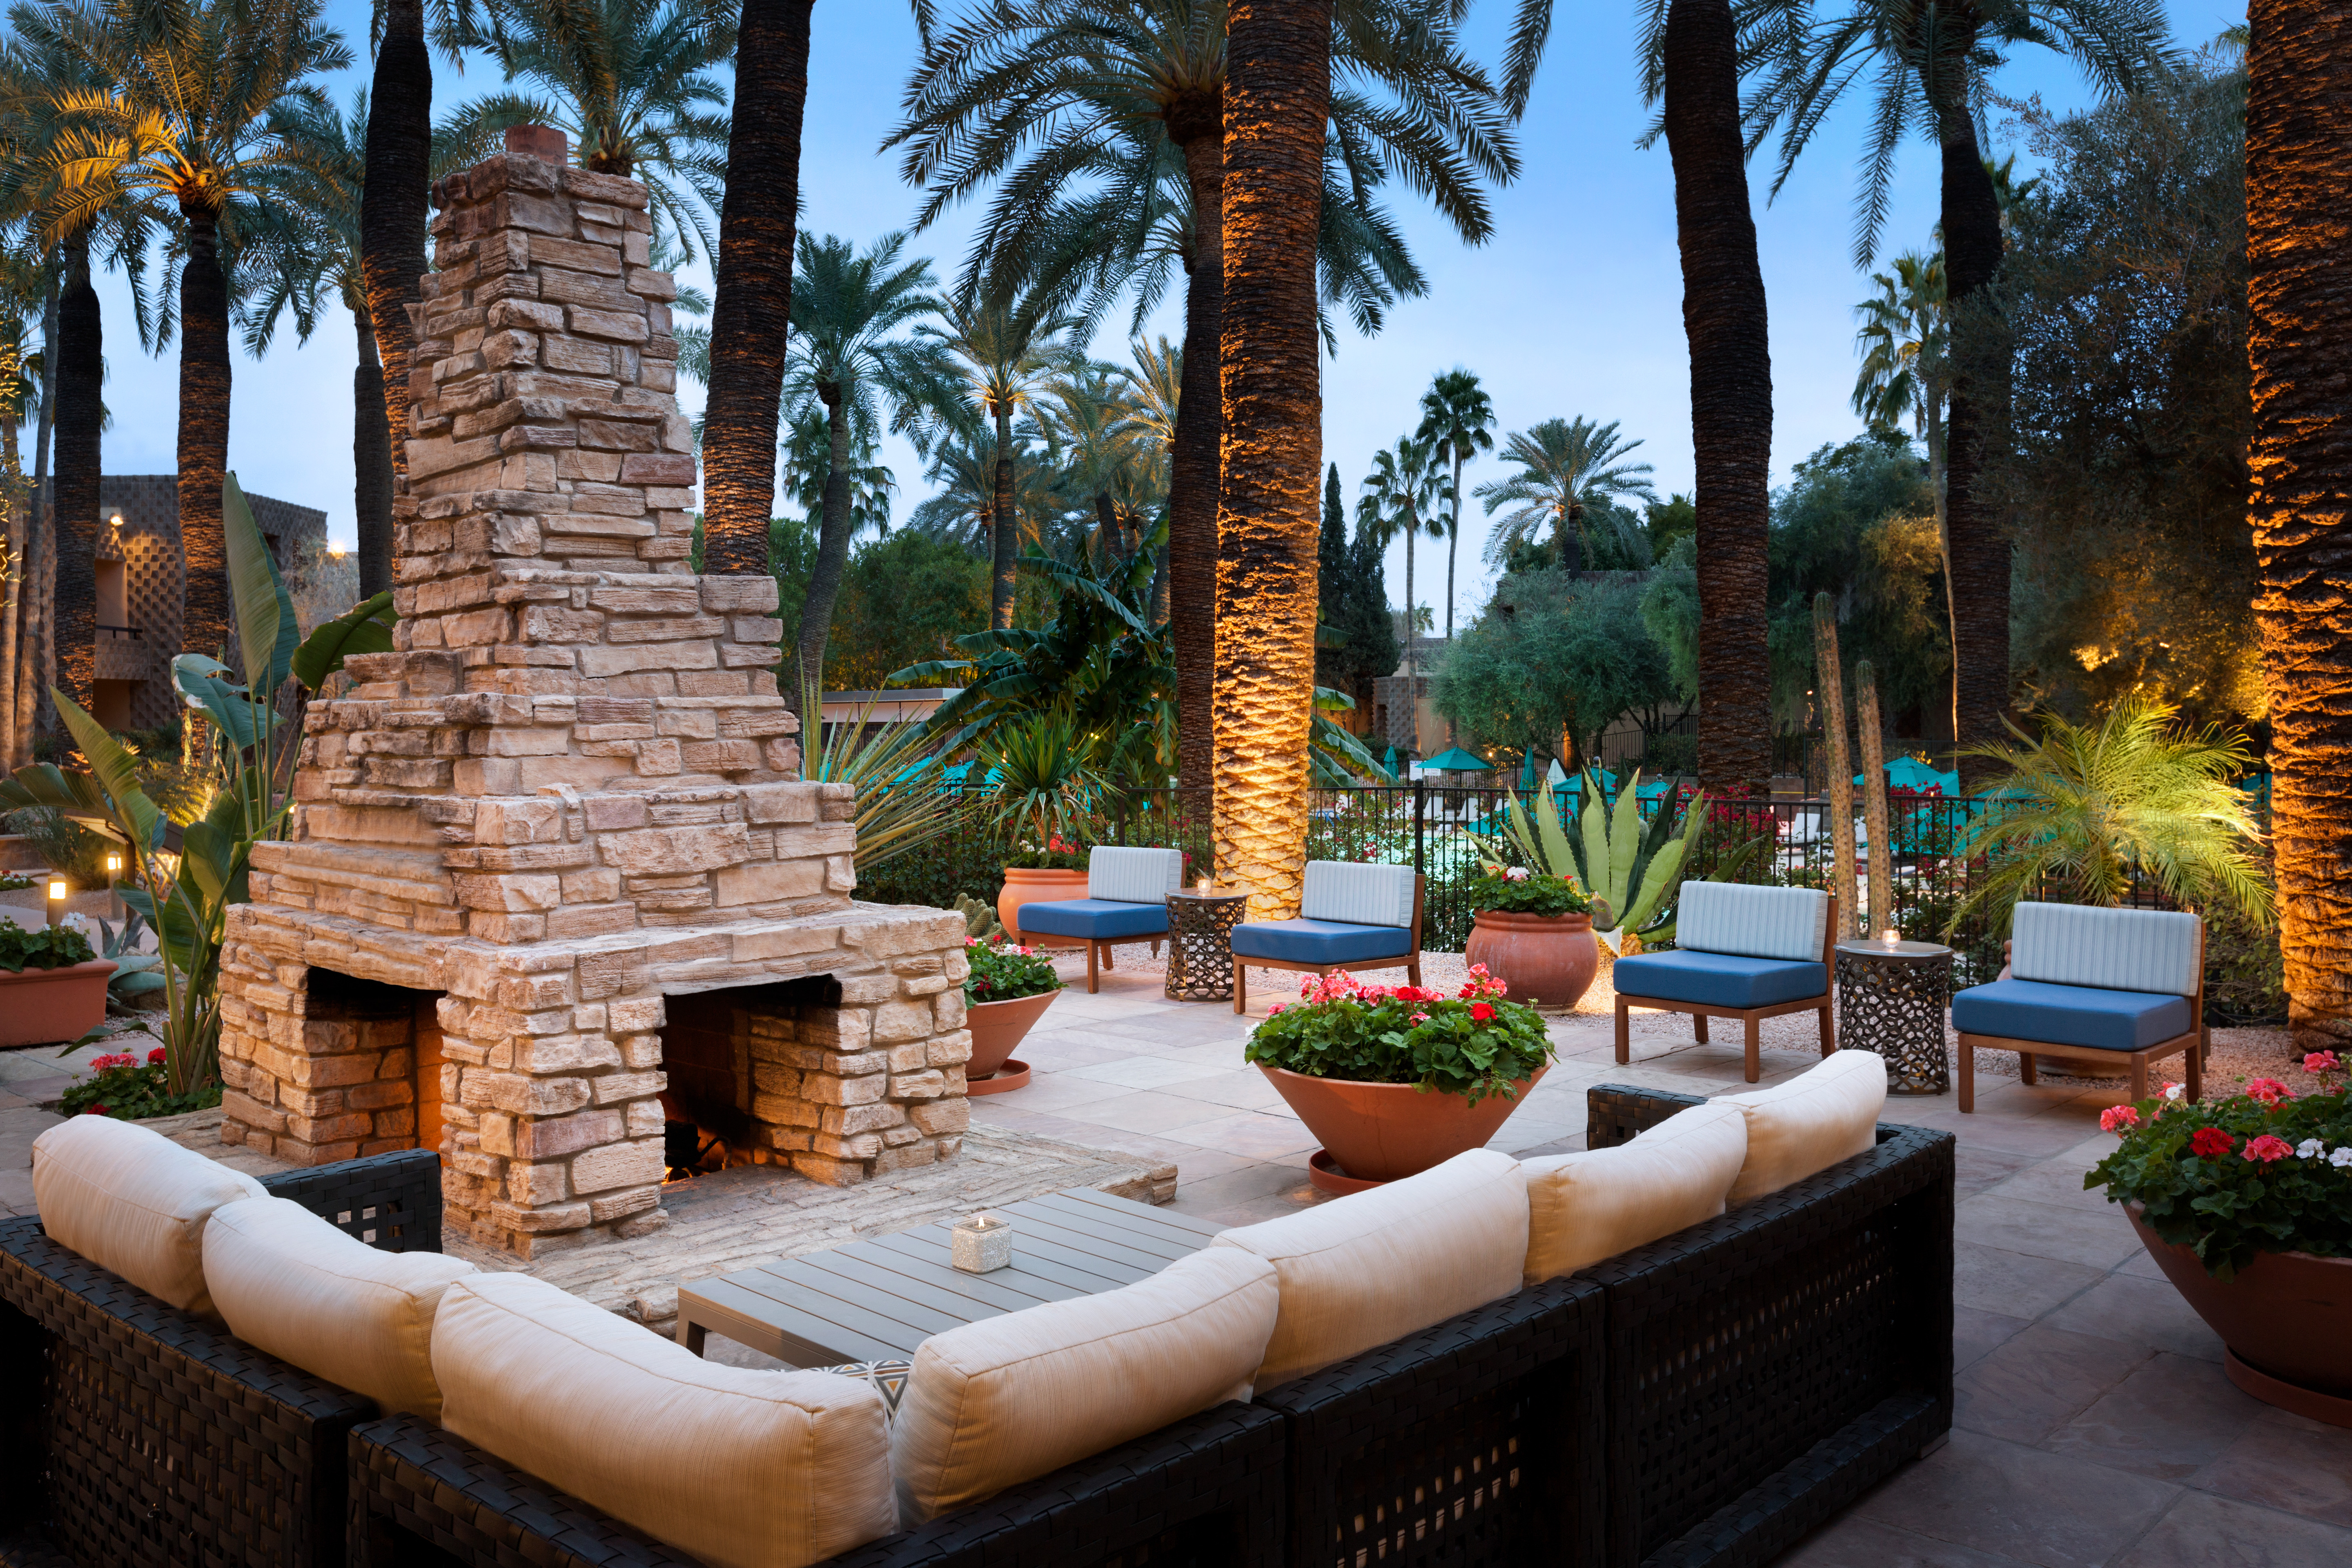 Illuminated Outdoor Patio With Furnace, Candlelit Tables, and Mixed Seating Surrounded by Palm Trees at Dusk